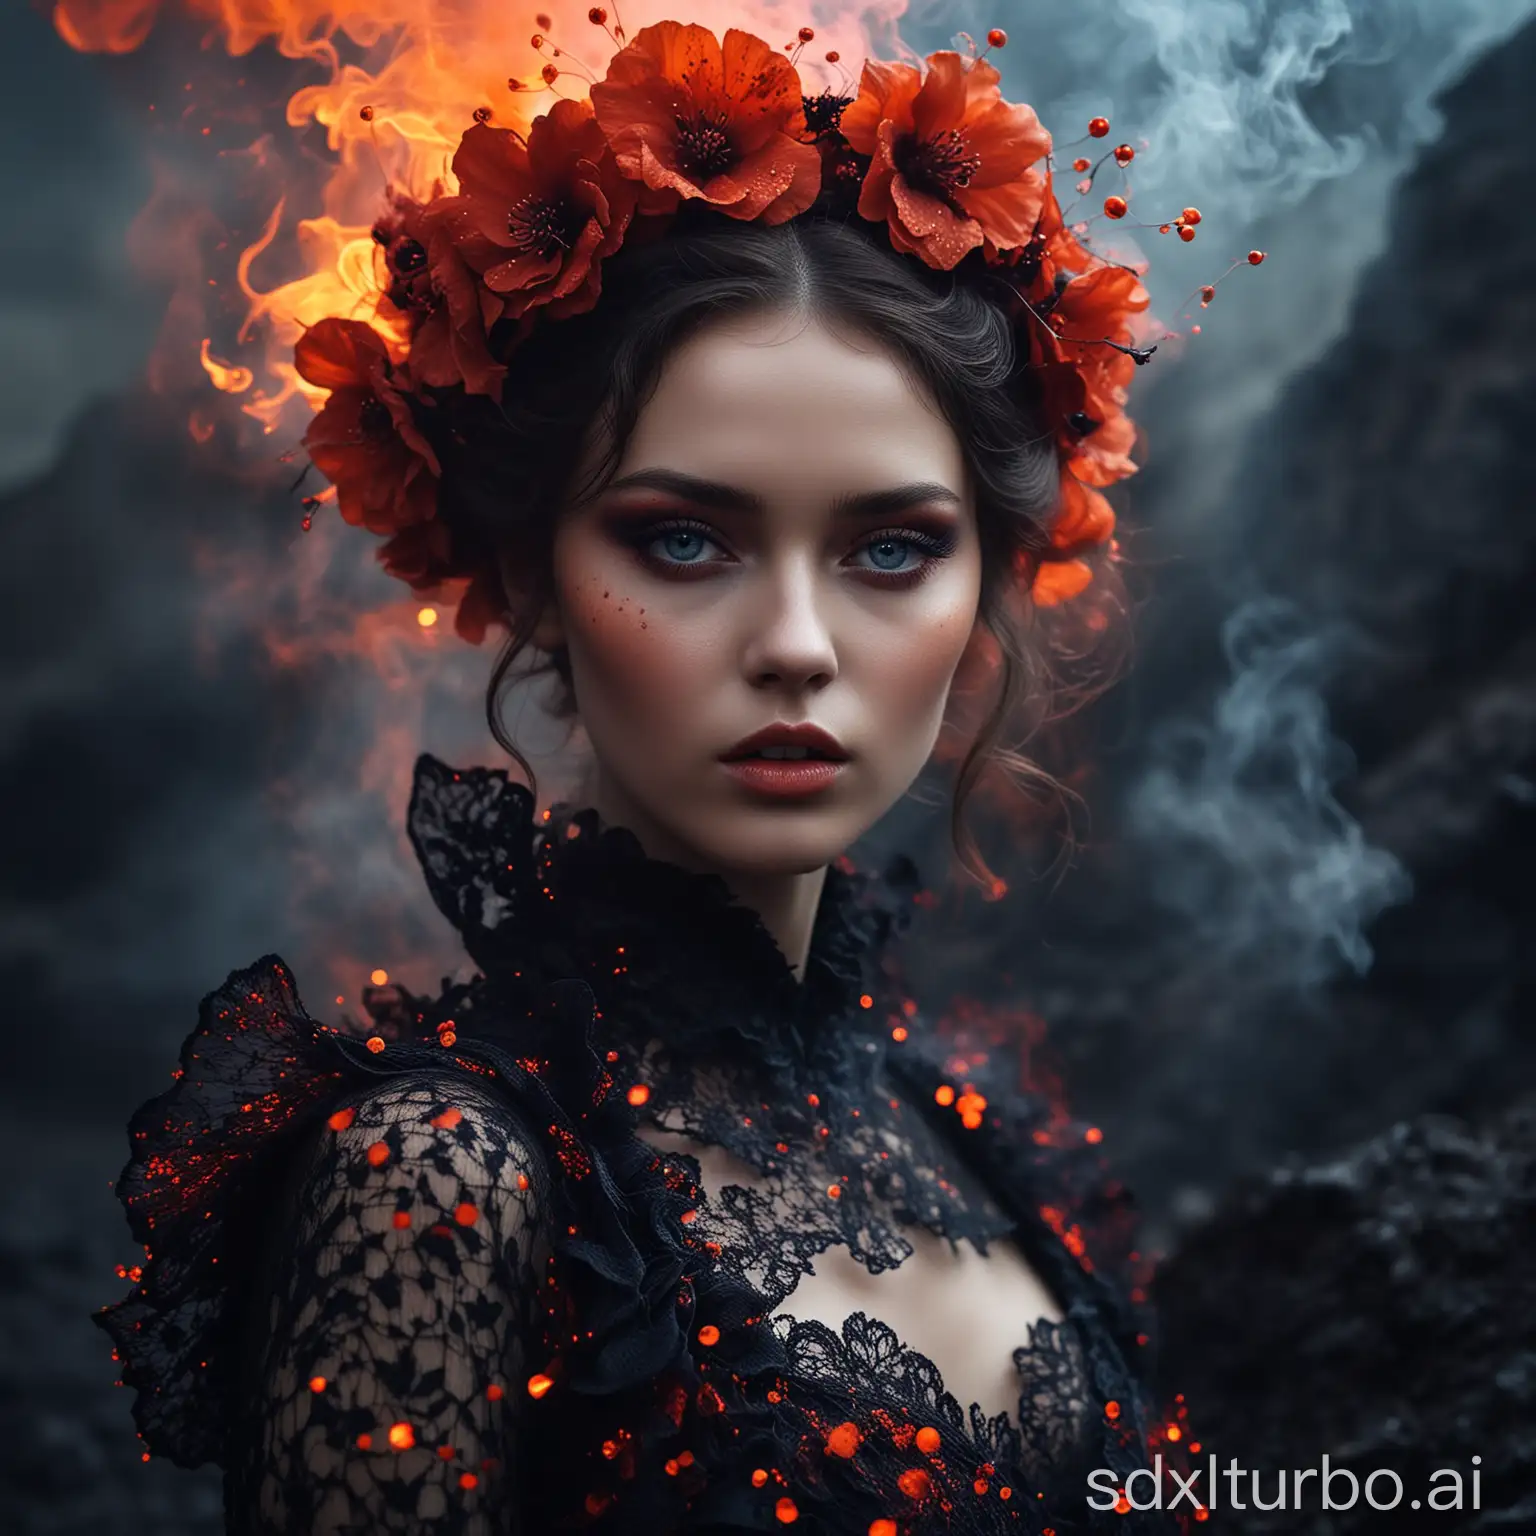 Ethereal-Beauty-in-Volcanic-Landscape-Model-in-Black-and-Red-Couture-Fashion-Photography